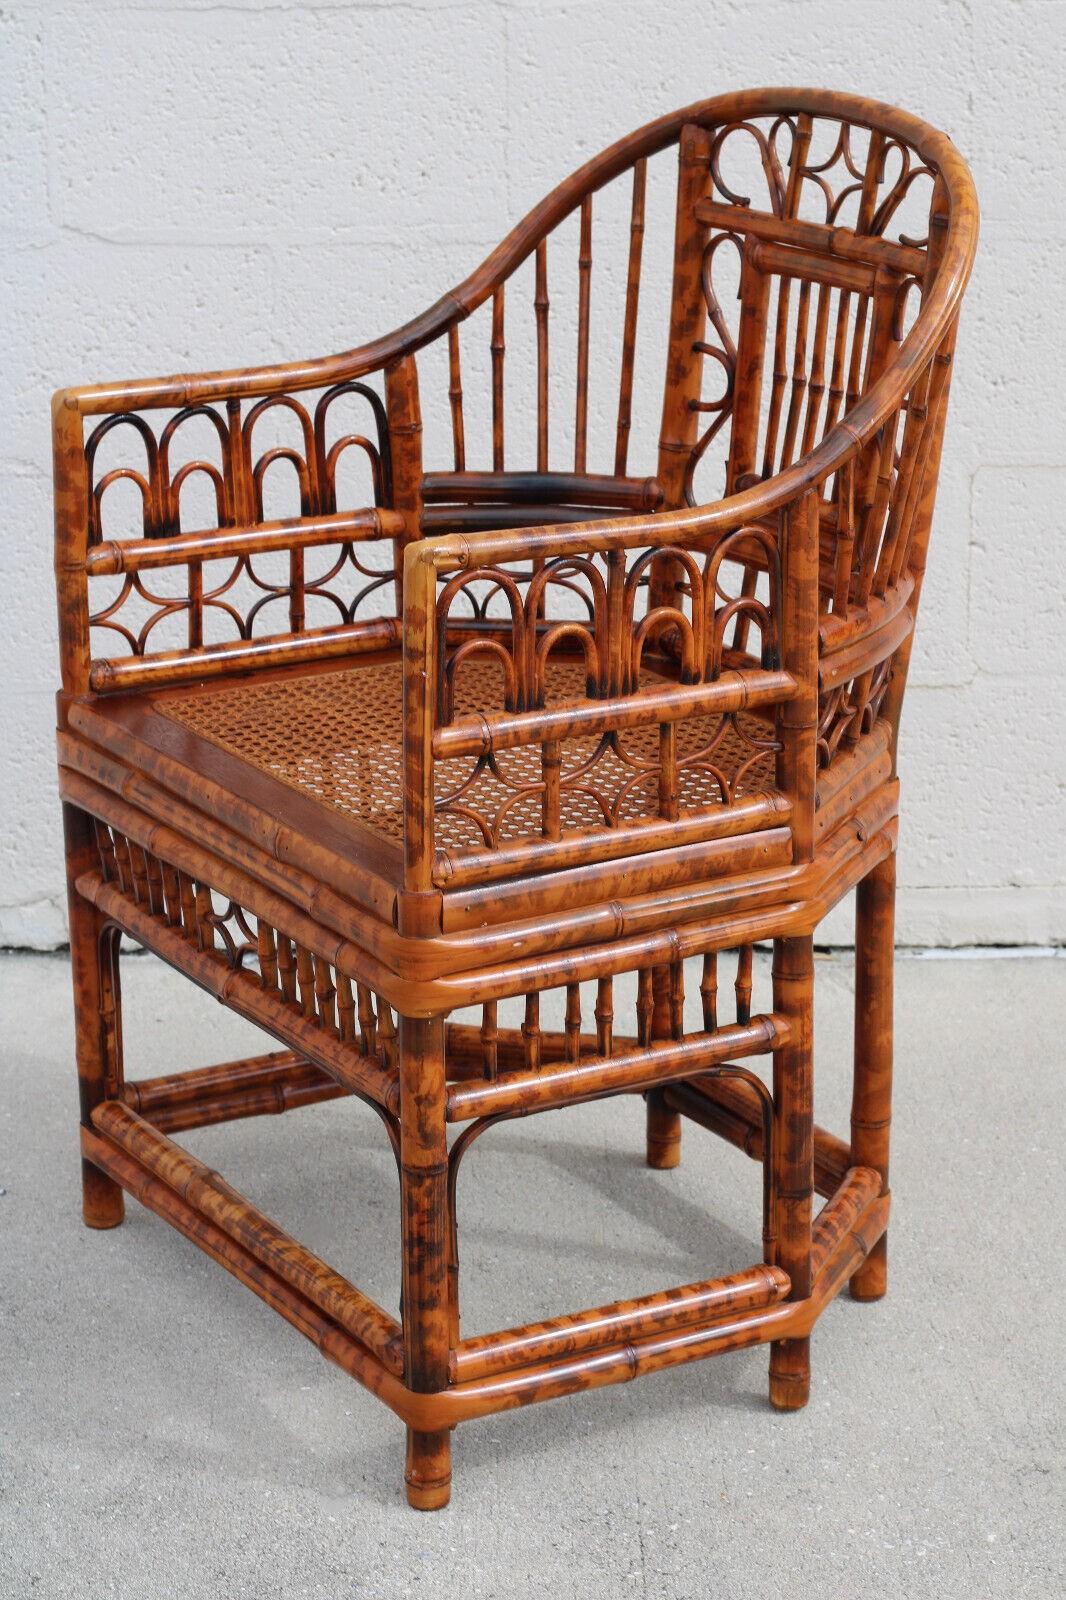 Hand-Crafted Brighton Pavilion Style Tortoiseshell Bamboo Cane Dining Armchairs, a Pair For Sale